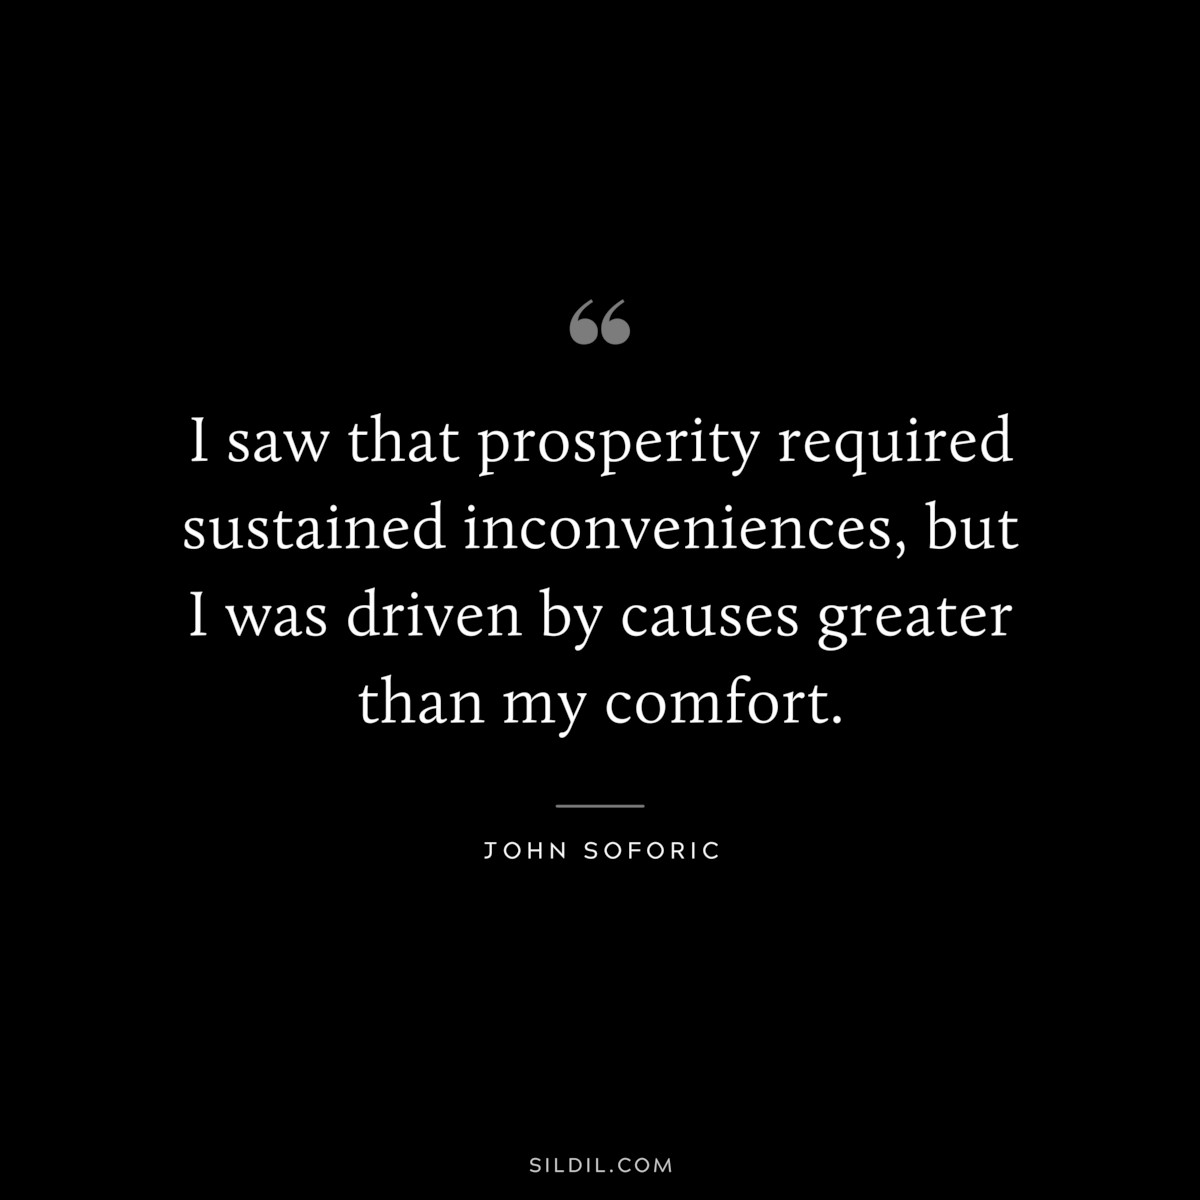 I saw that prosperity required sustained inconveniences, but I was driven by causes greater than my comfort. ― John Soforic